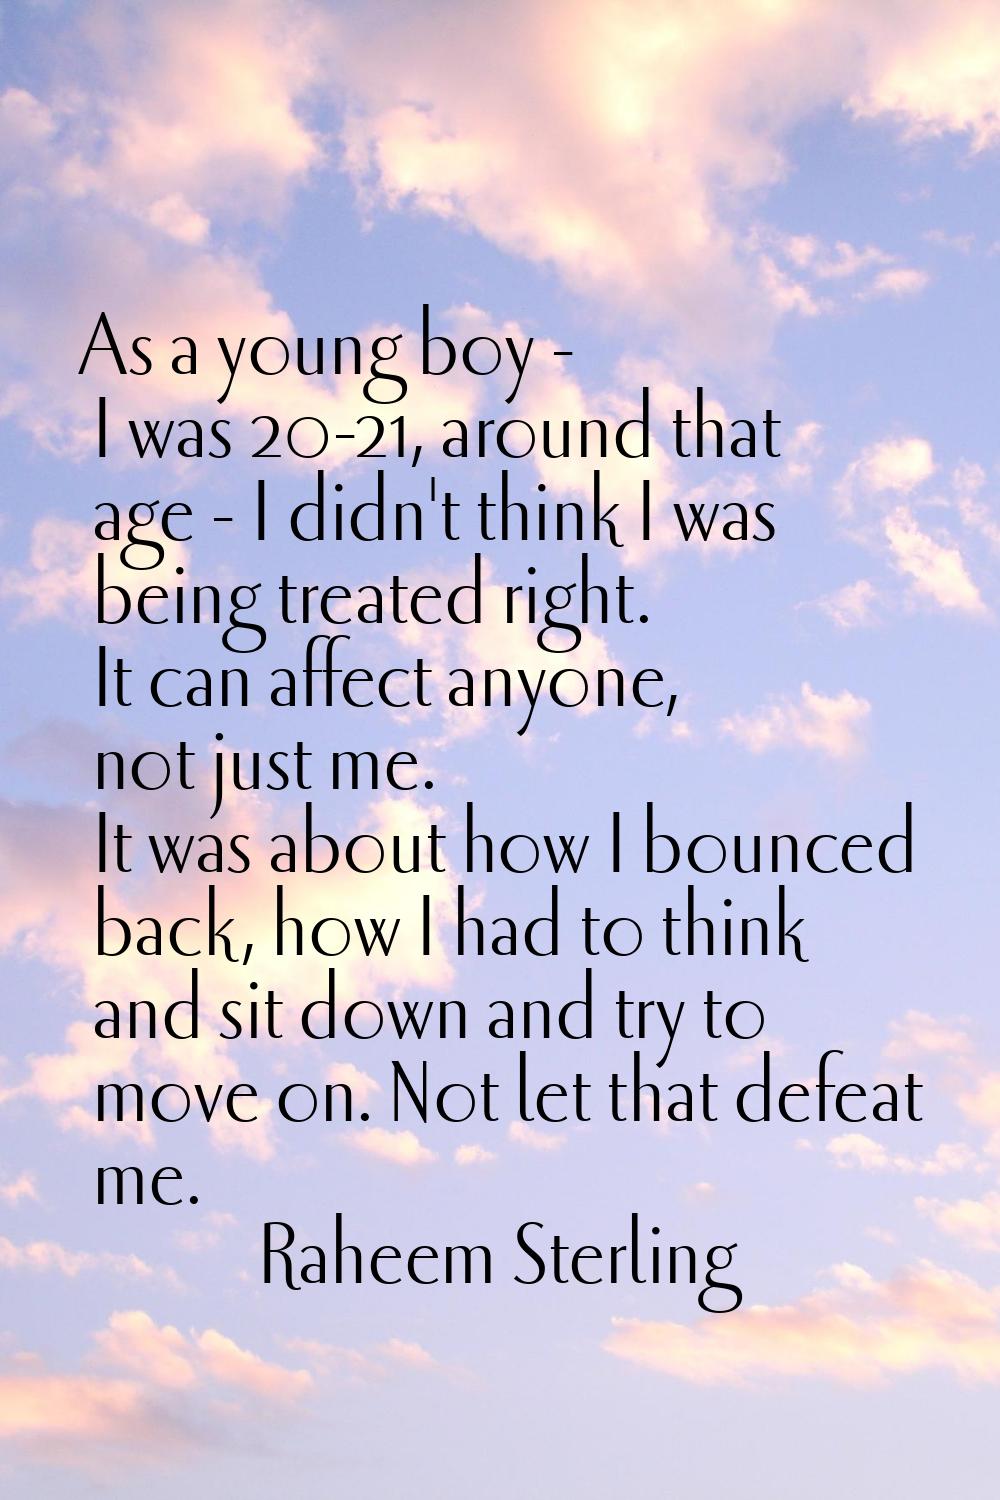 As a young boy - I was 20-21, around that age - I didn't think I was being treated right. It can af